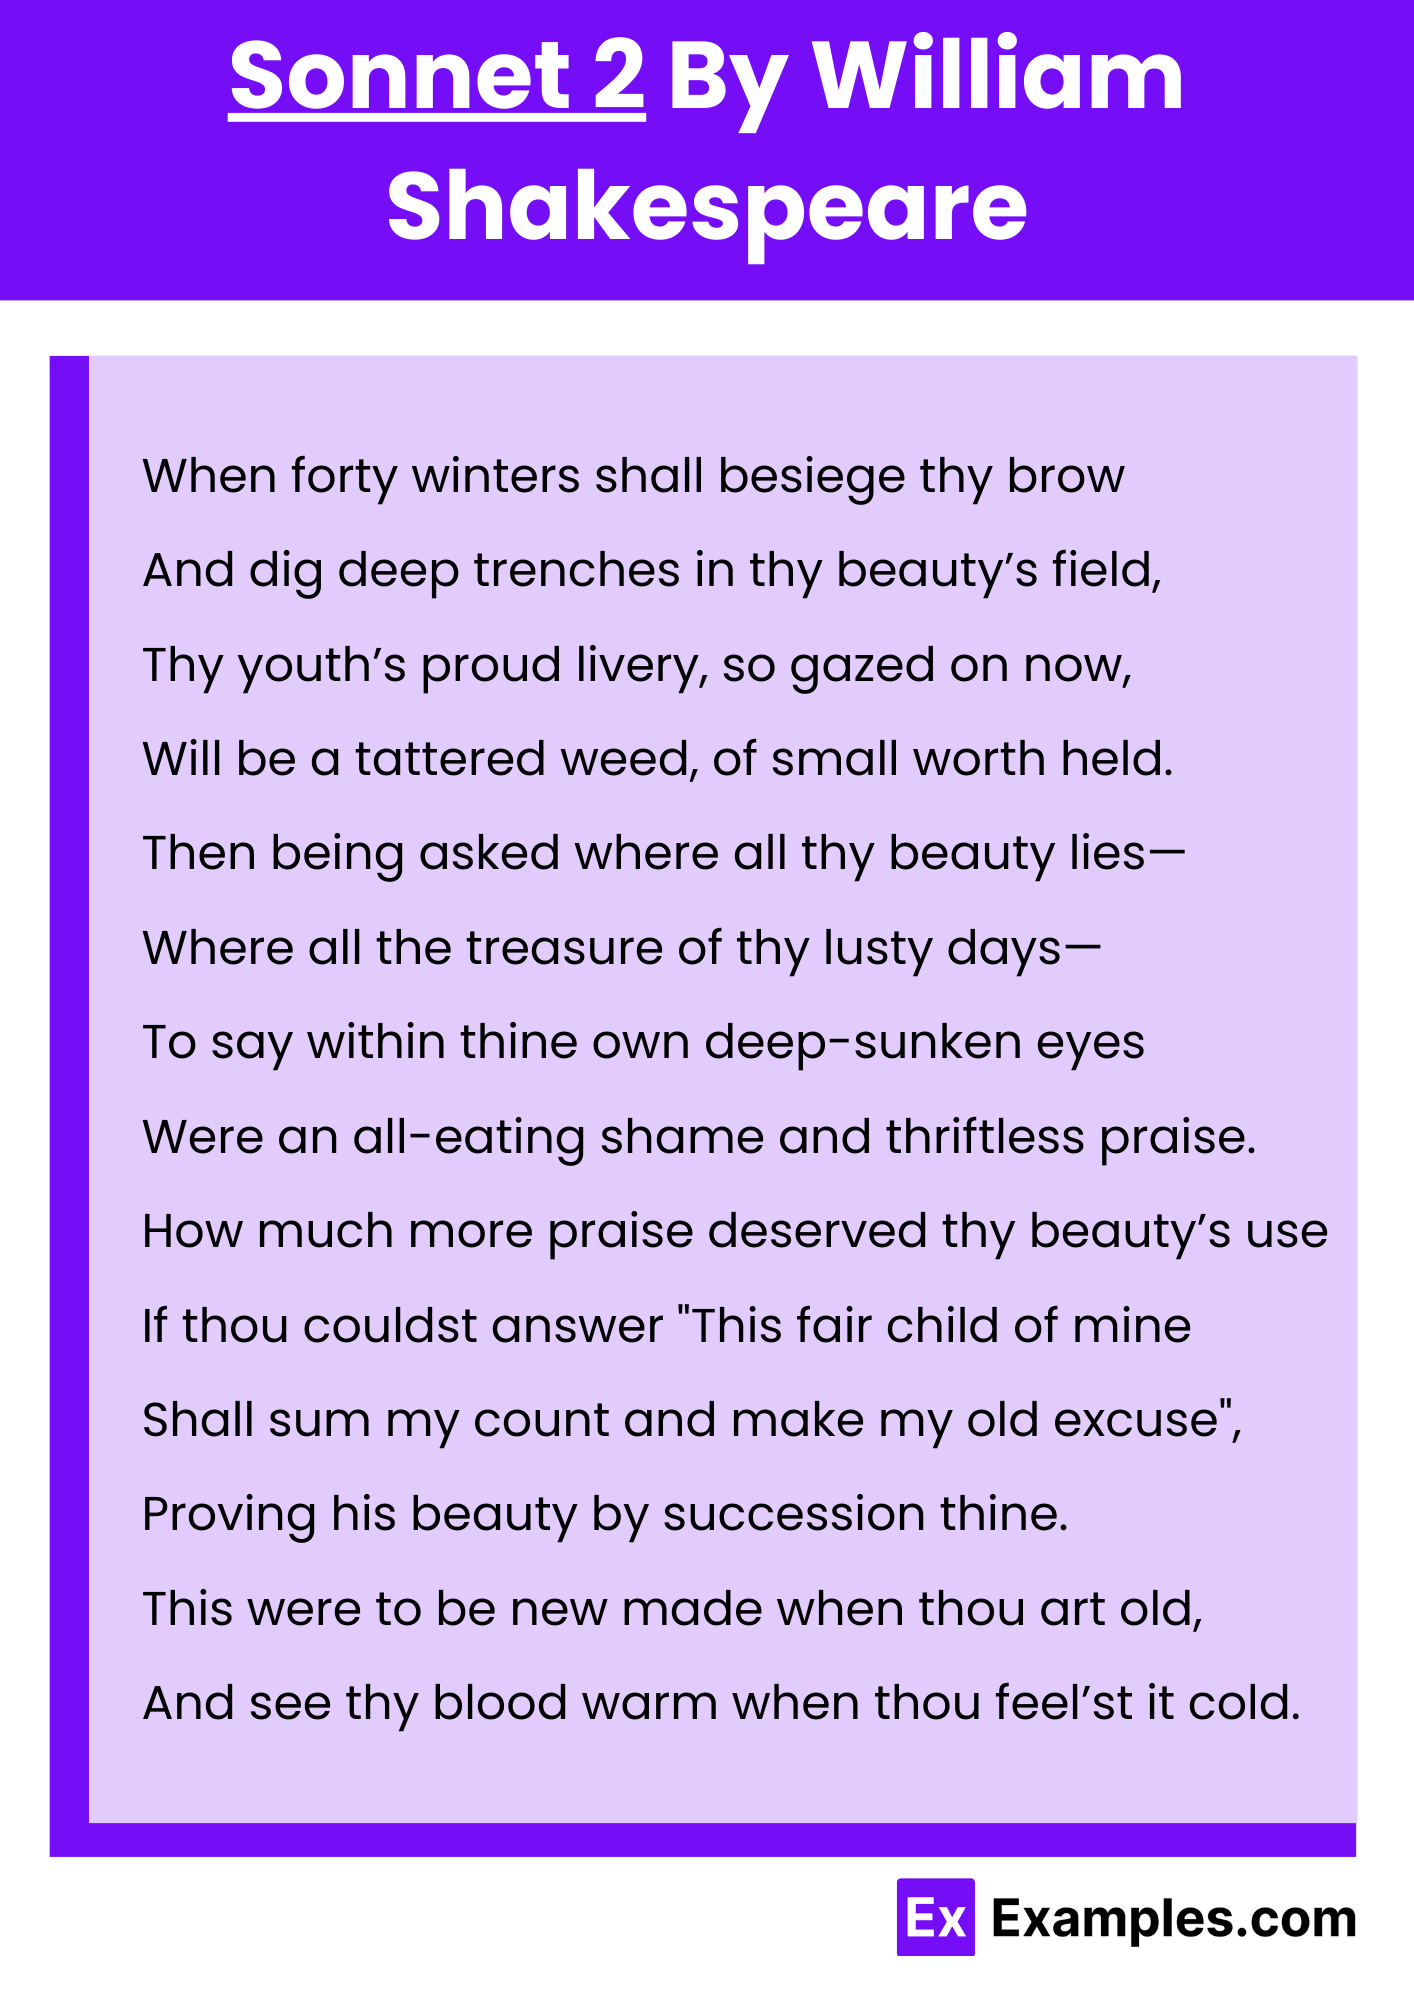 Sonnet 2 By William Shakespeare